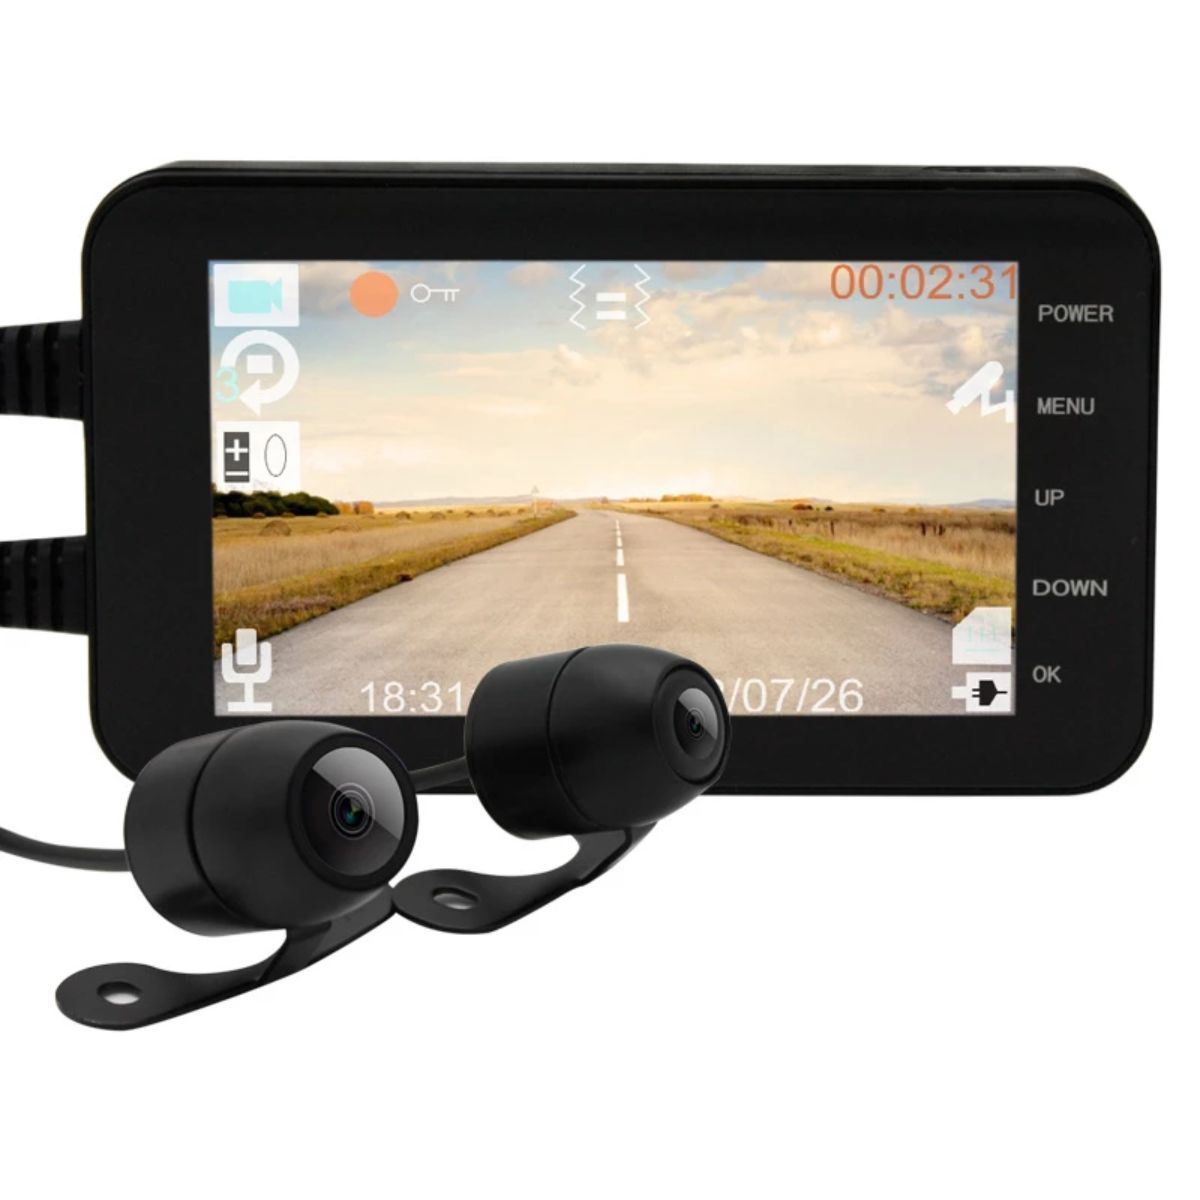 A Motorcycle Dual Lens Dash Camera Video Recorder 4 Inch HD 1080P with a camera and earphones that includes a Dual Lens Dash Cam.